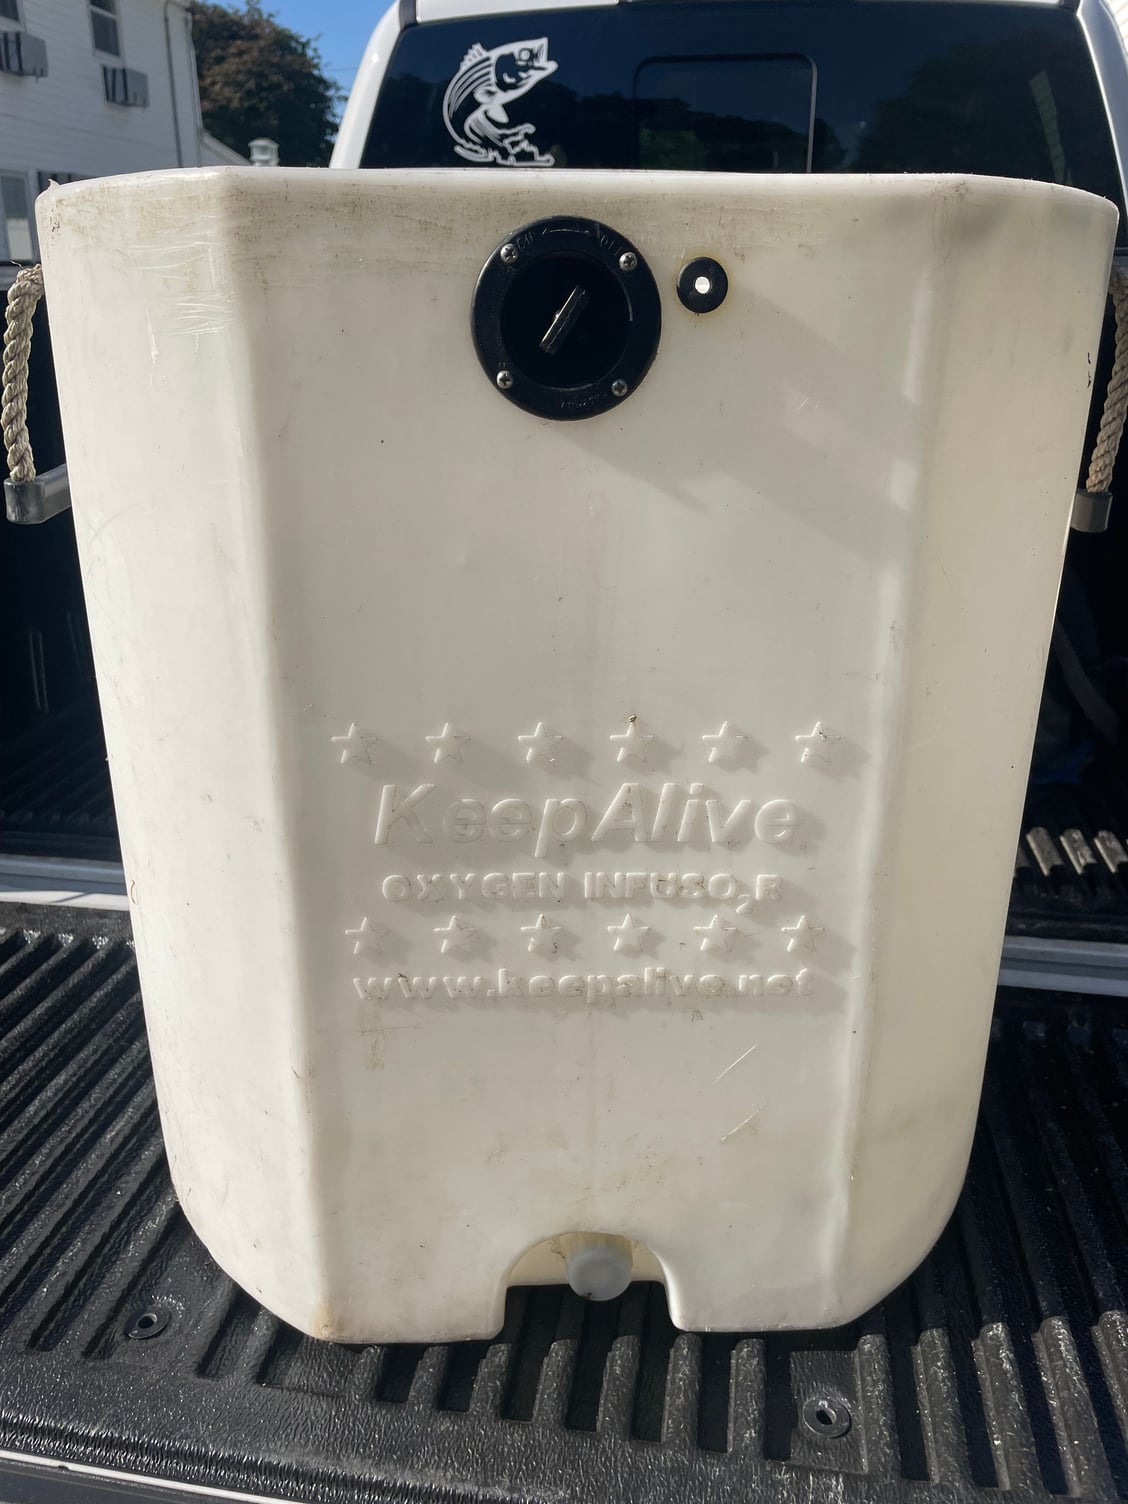 30 Gal Keep alive bait aerating system tank only - The Hull Truth - Boating  and Fishing Forum